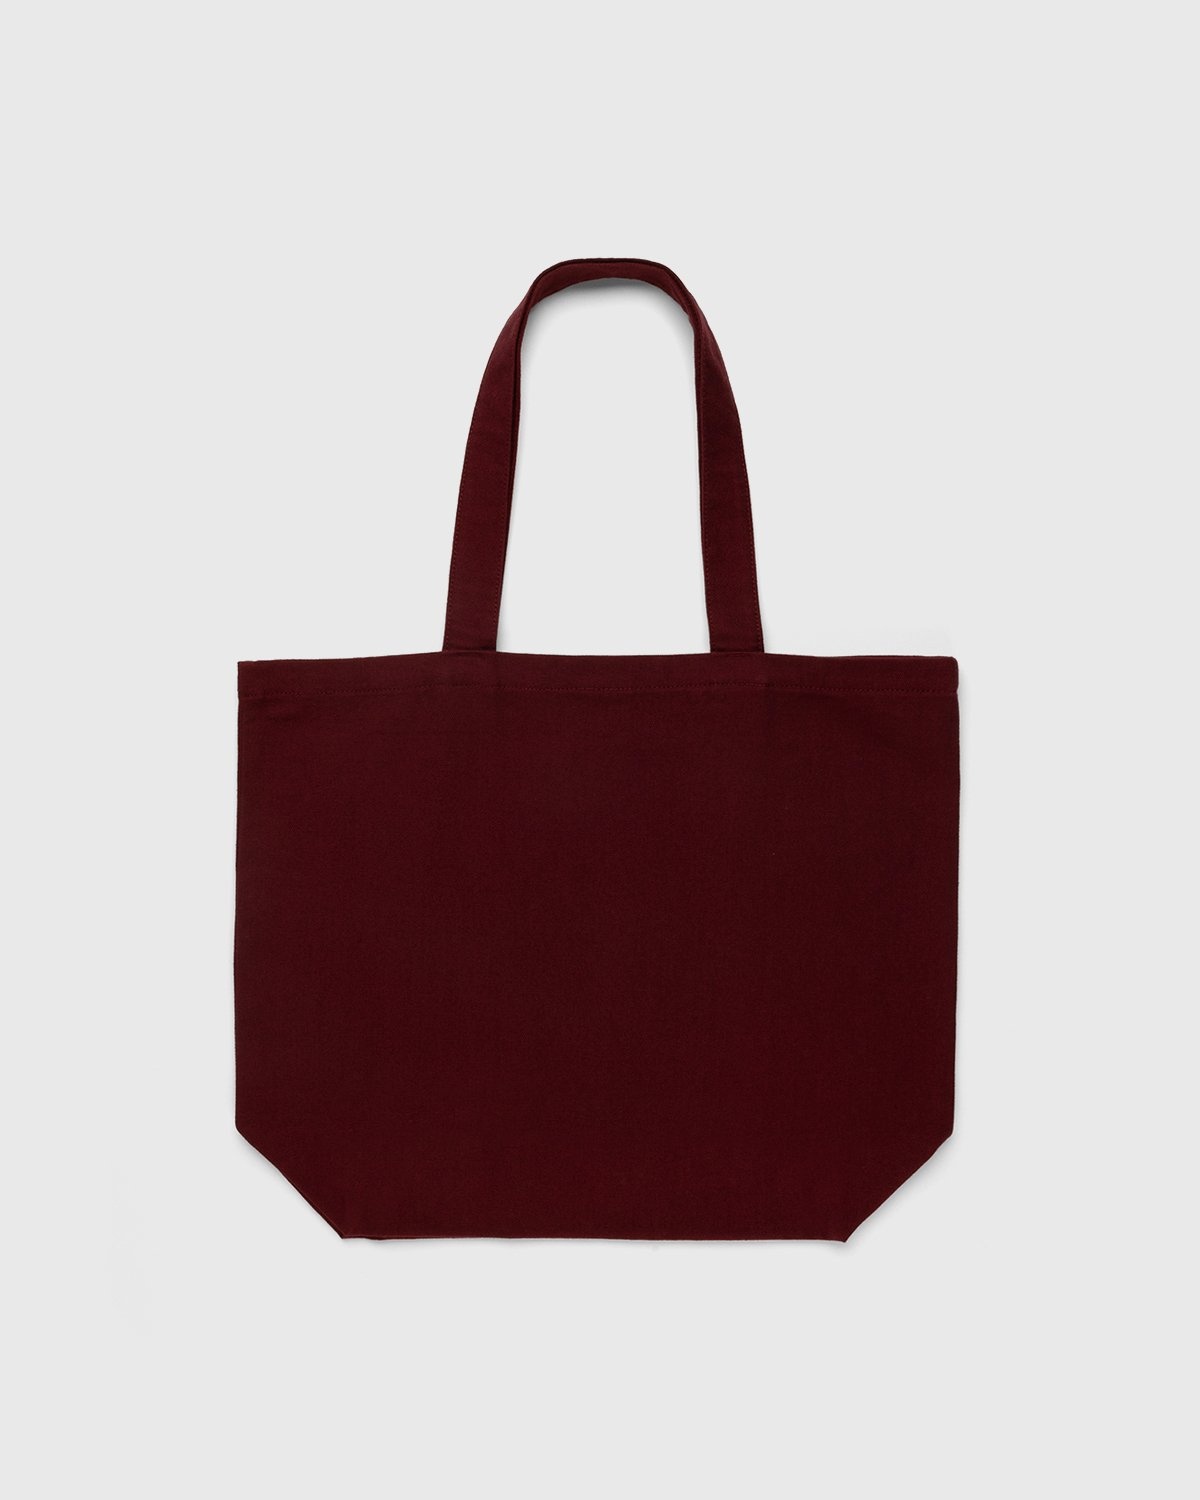 Highsnobiety – HS Sports Logo Tote Bag Bordeaux - Tote Bags - Red - Image 2